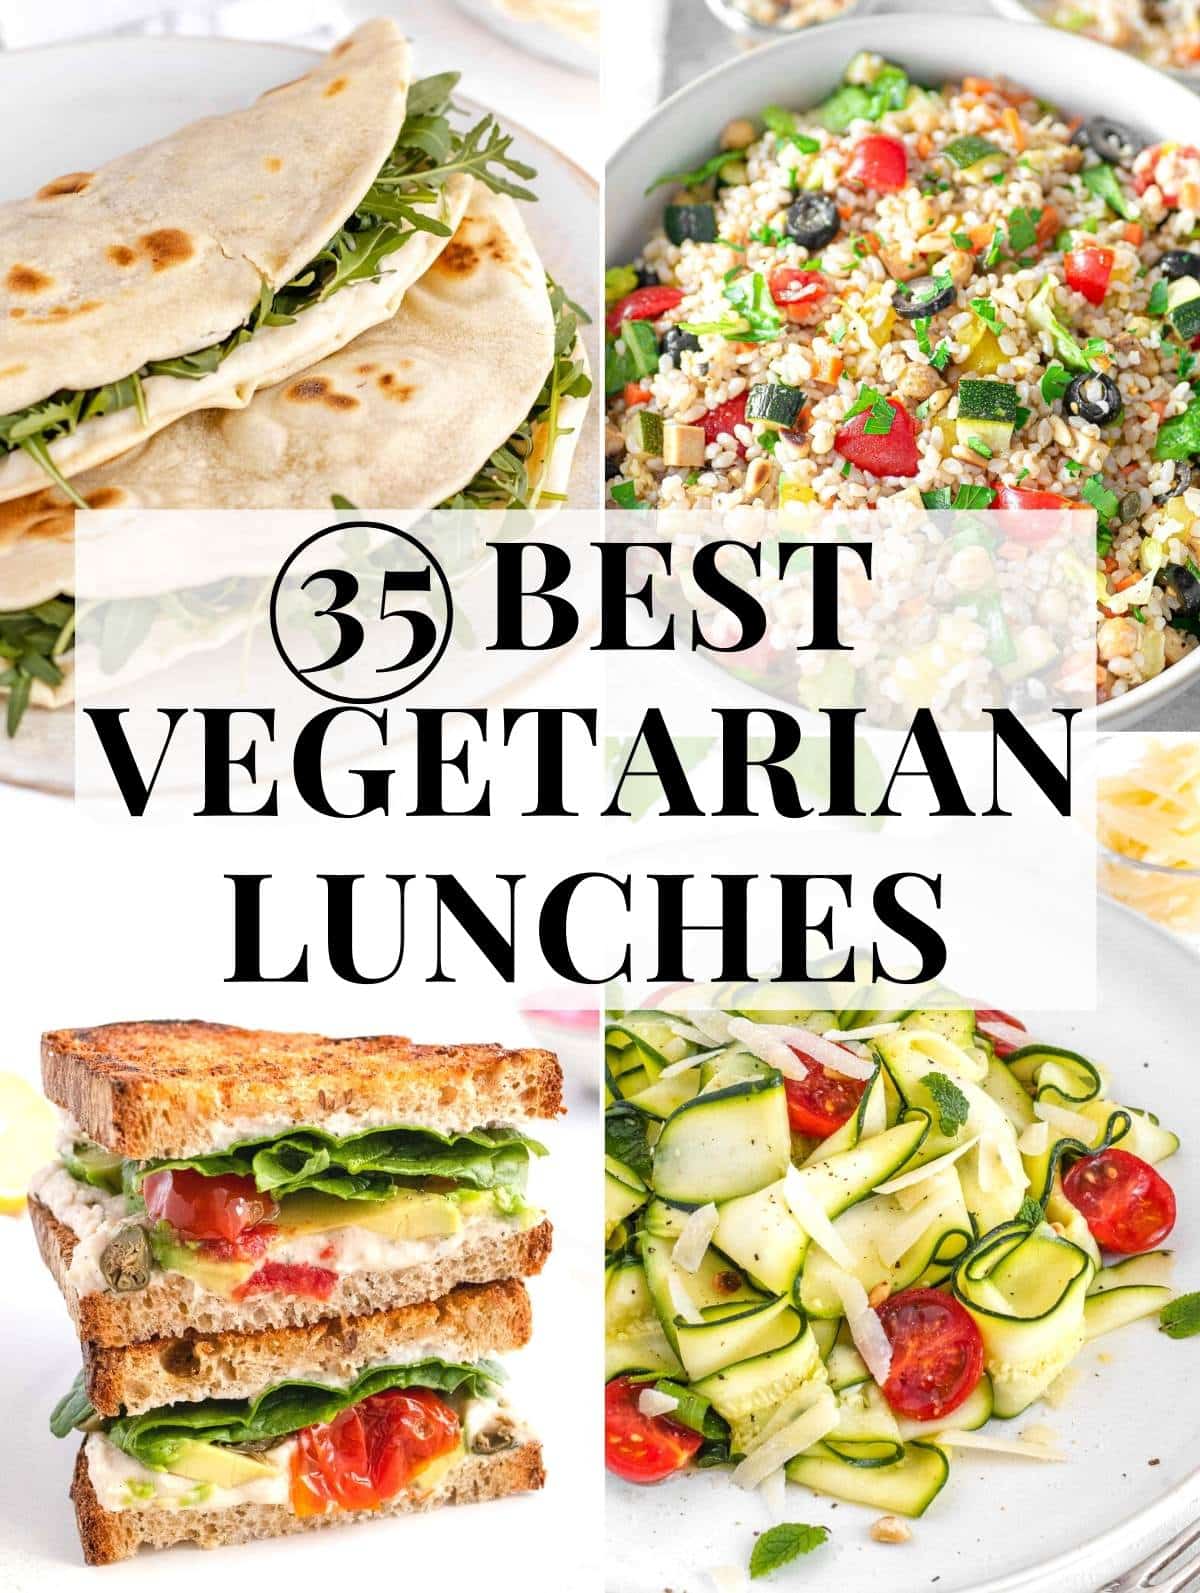 Best vegetarian lunches including sandwich, salad and wraps